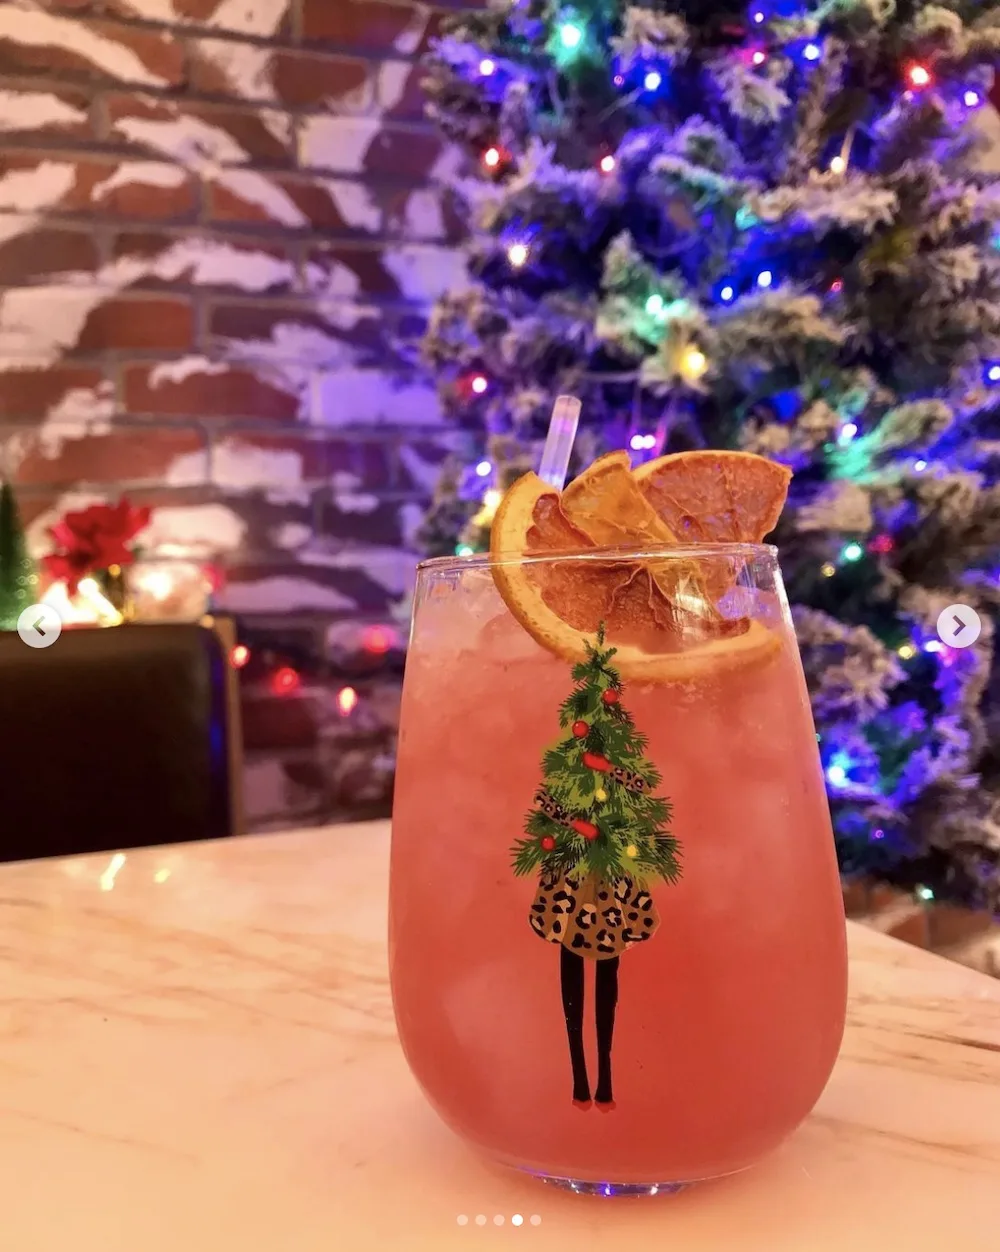 Looking for a Christmas themed bar to enjoy a festive drink in this holiday season? This is for you! For the last few years Christmas bars have been popping up in Toronto during the holiday season and they are so much fun. From festive cocktails to over the top holiday decor, here are the Toronto Christmas bars that you need to check out in 2022. Pictured here: Java Jingle Holiday Bar